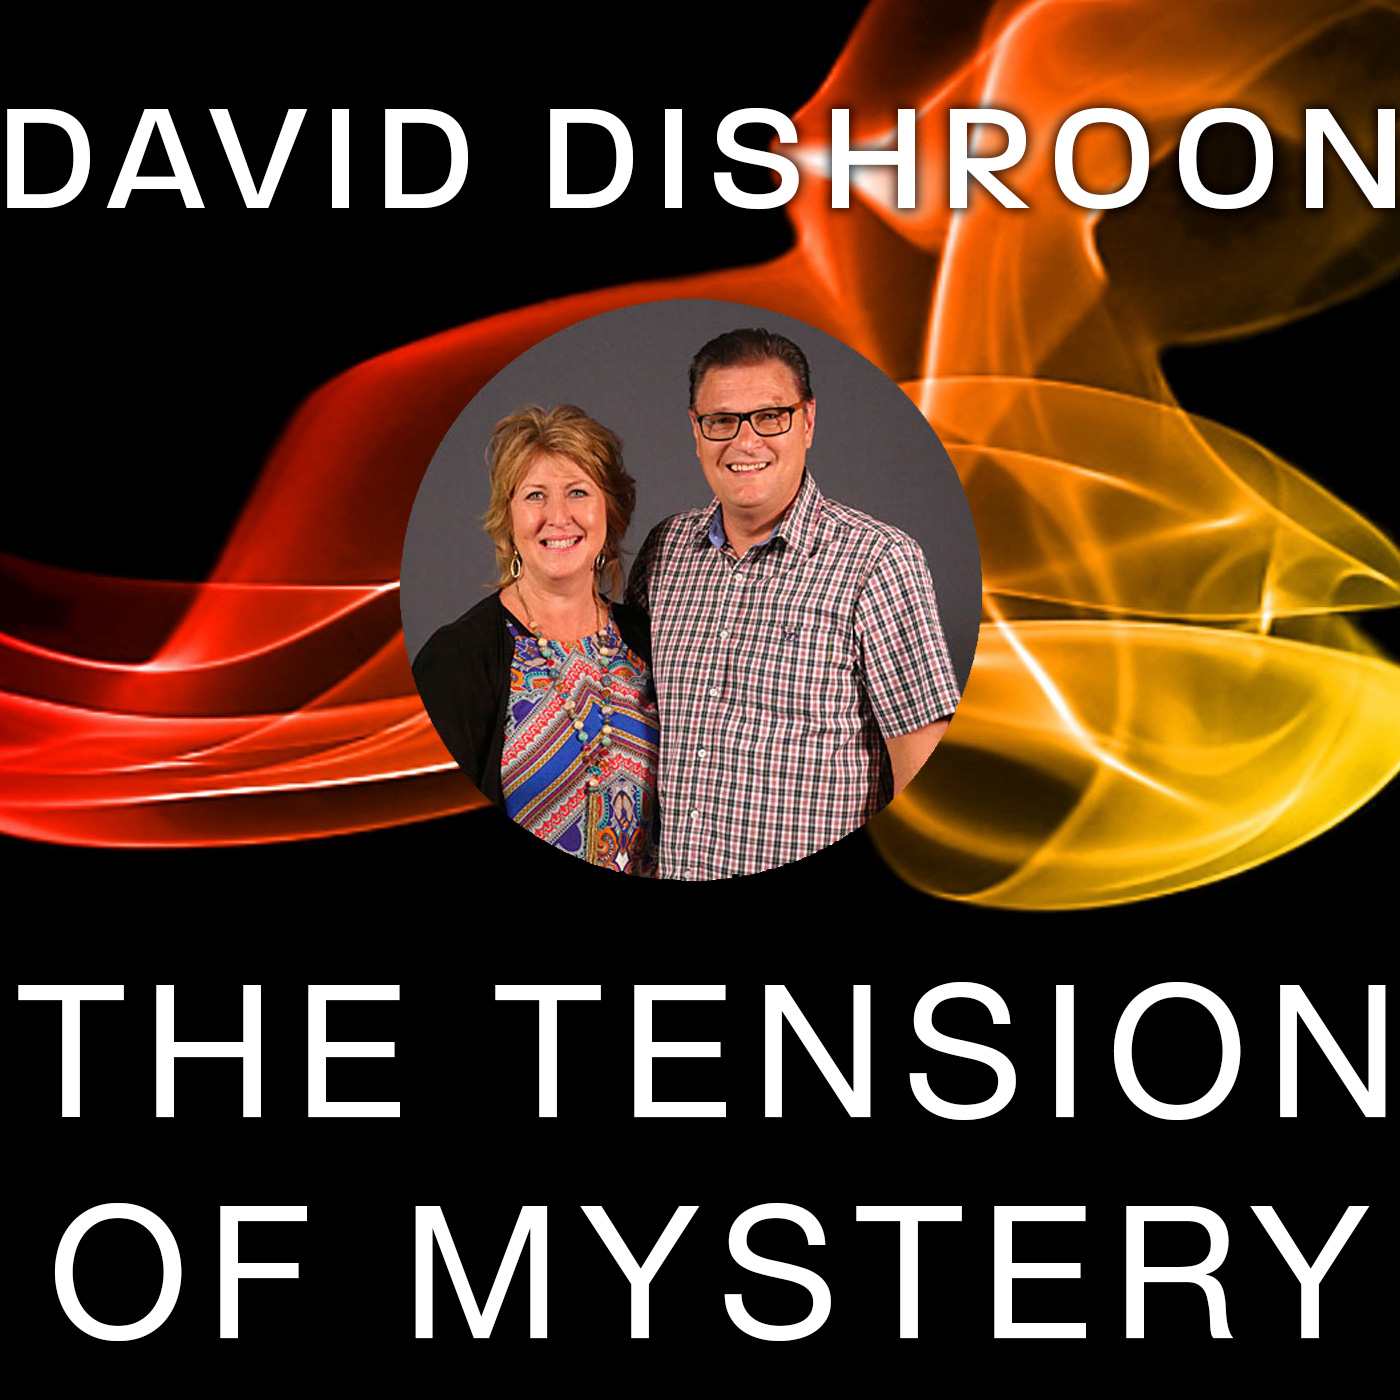 The Tension of Mystery by David Dishroon